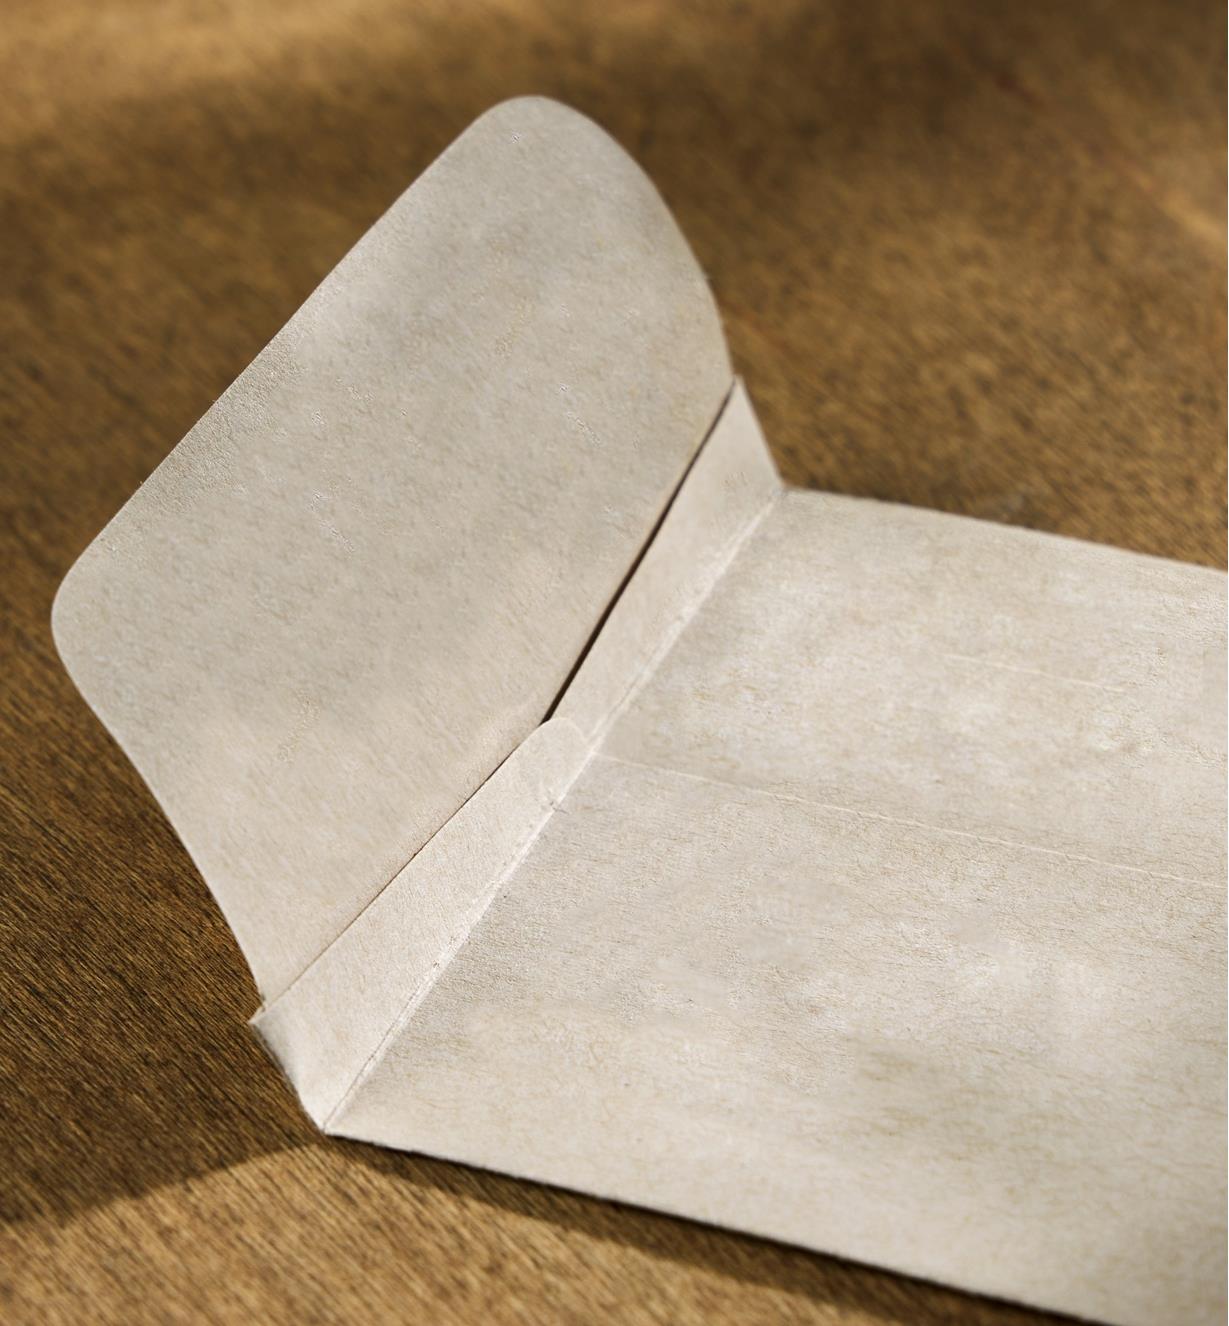 A close-up view of a seed keeper envelope’s self-adhesive closure